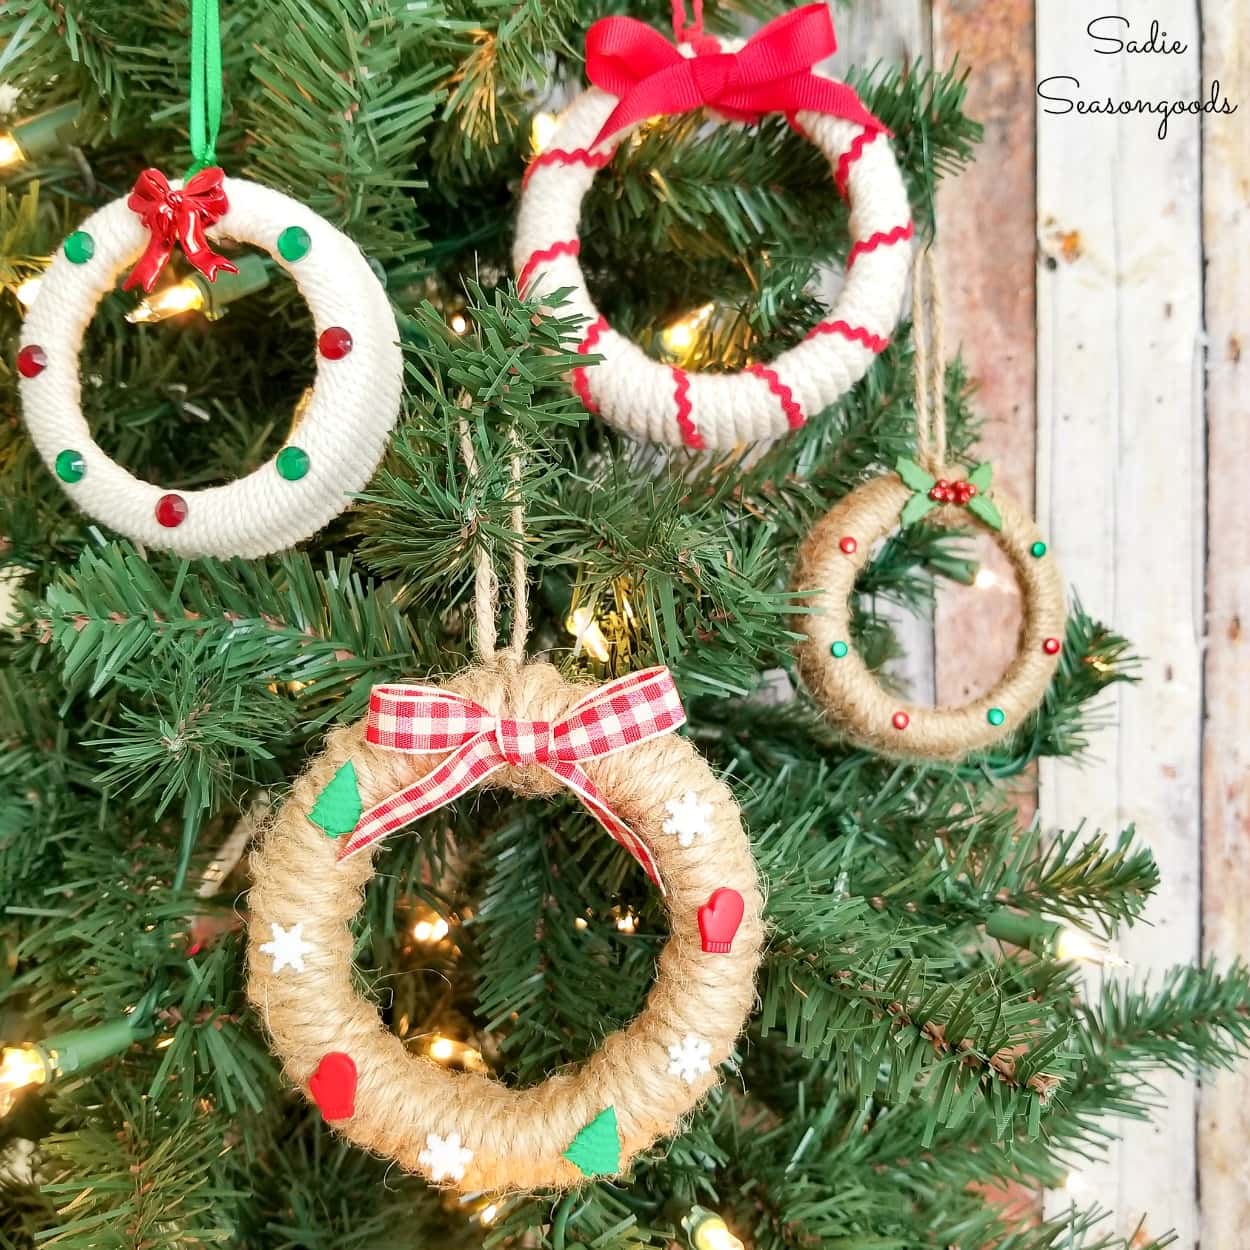 Mason Jar Lid Mini Christmas Wreaths | 50 Awesome DIY Yule Decorations and Craft Ideas You Can Make for the Winter Solstice